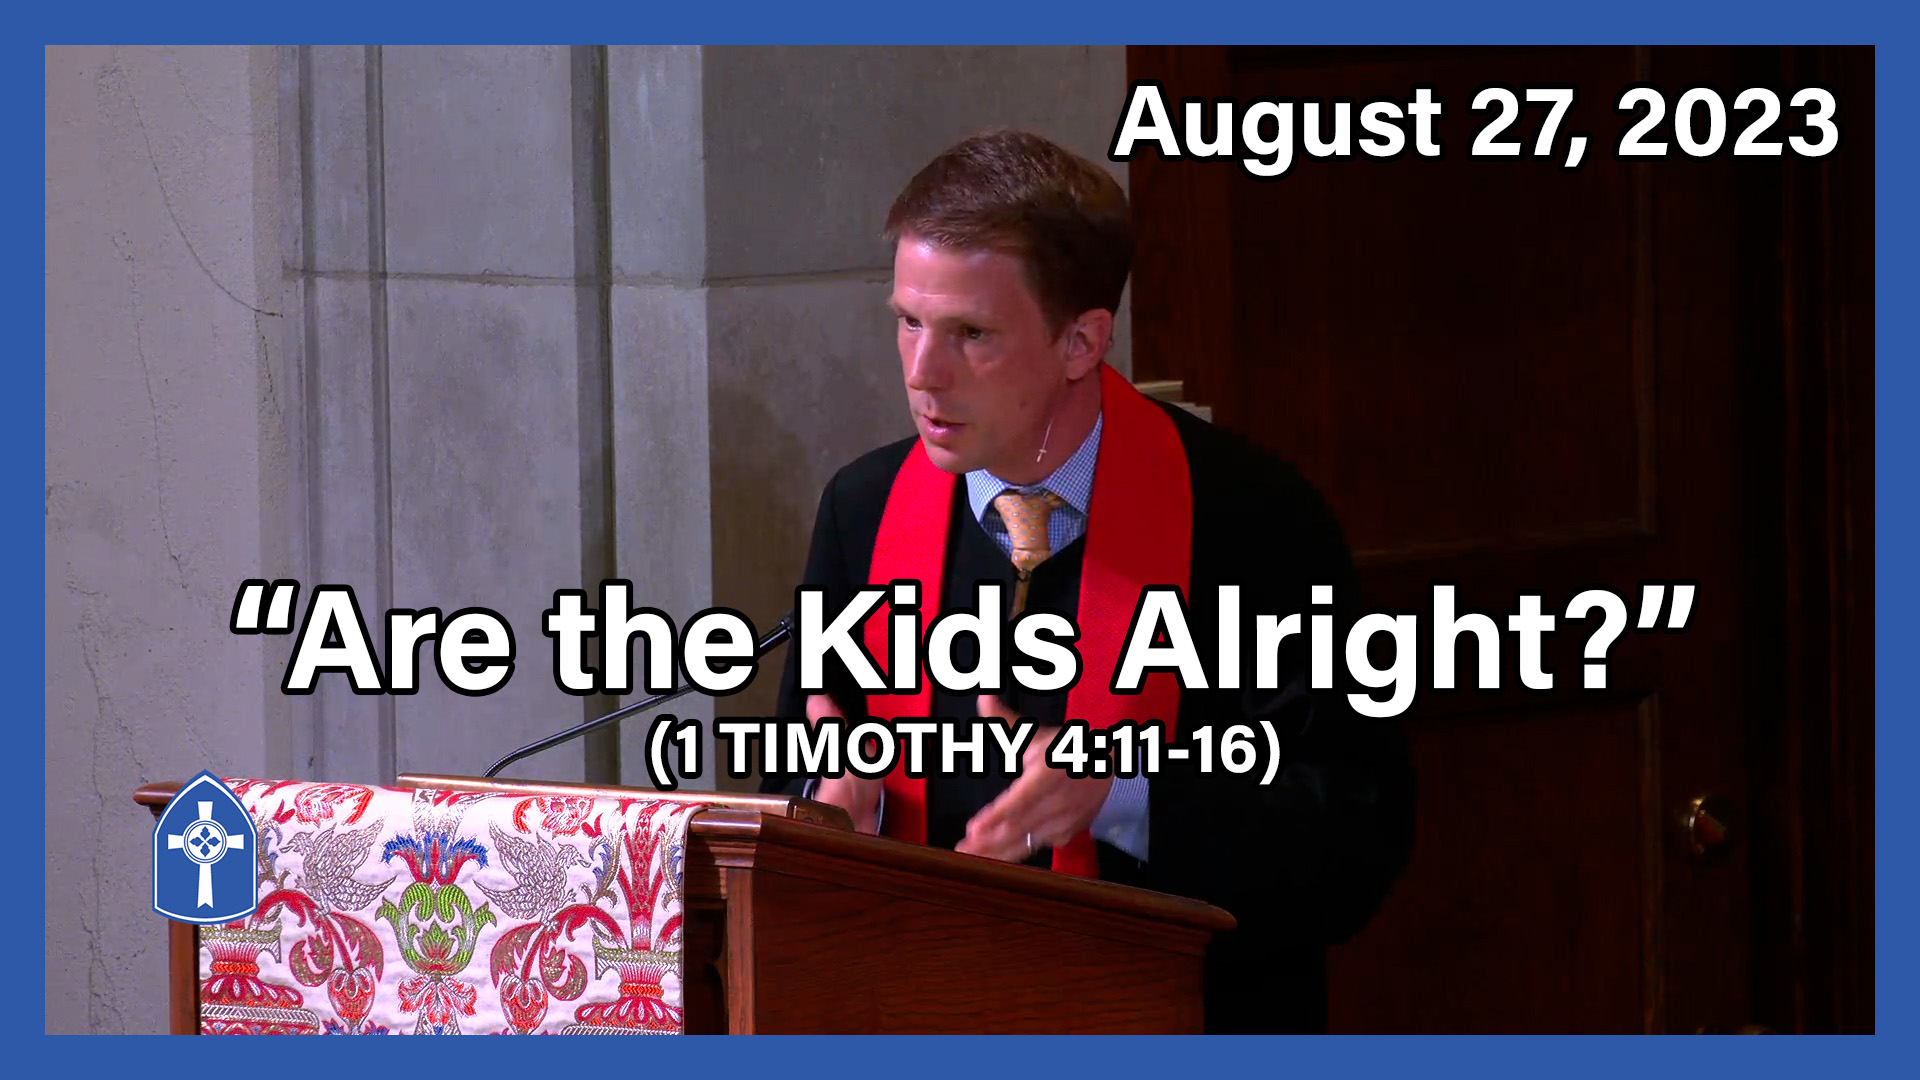 August 27 - Are the Kids Alright?